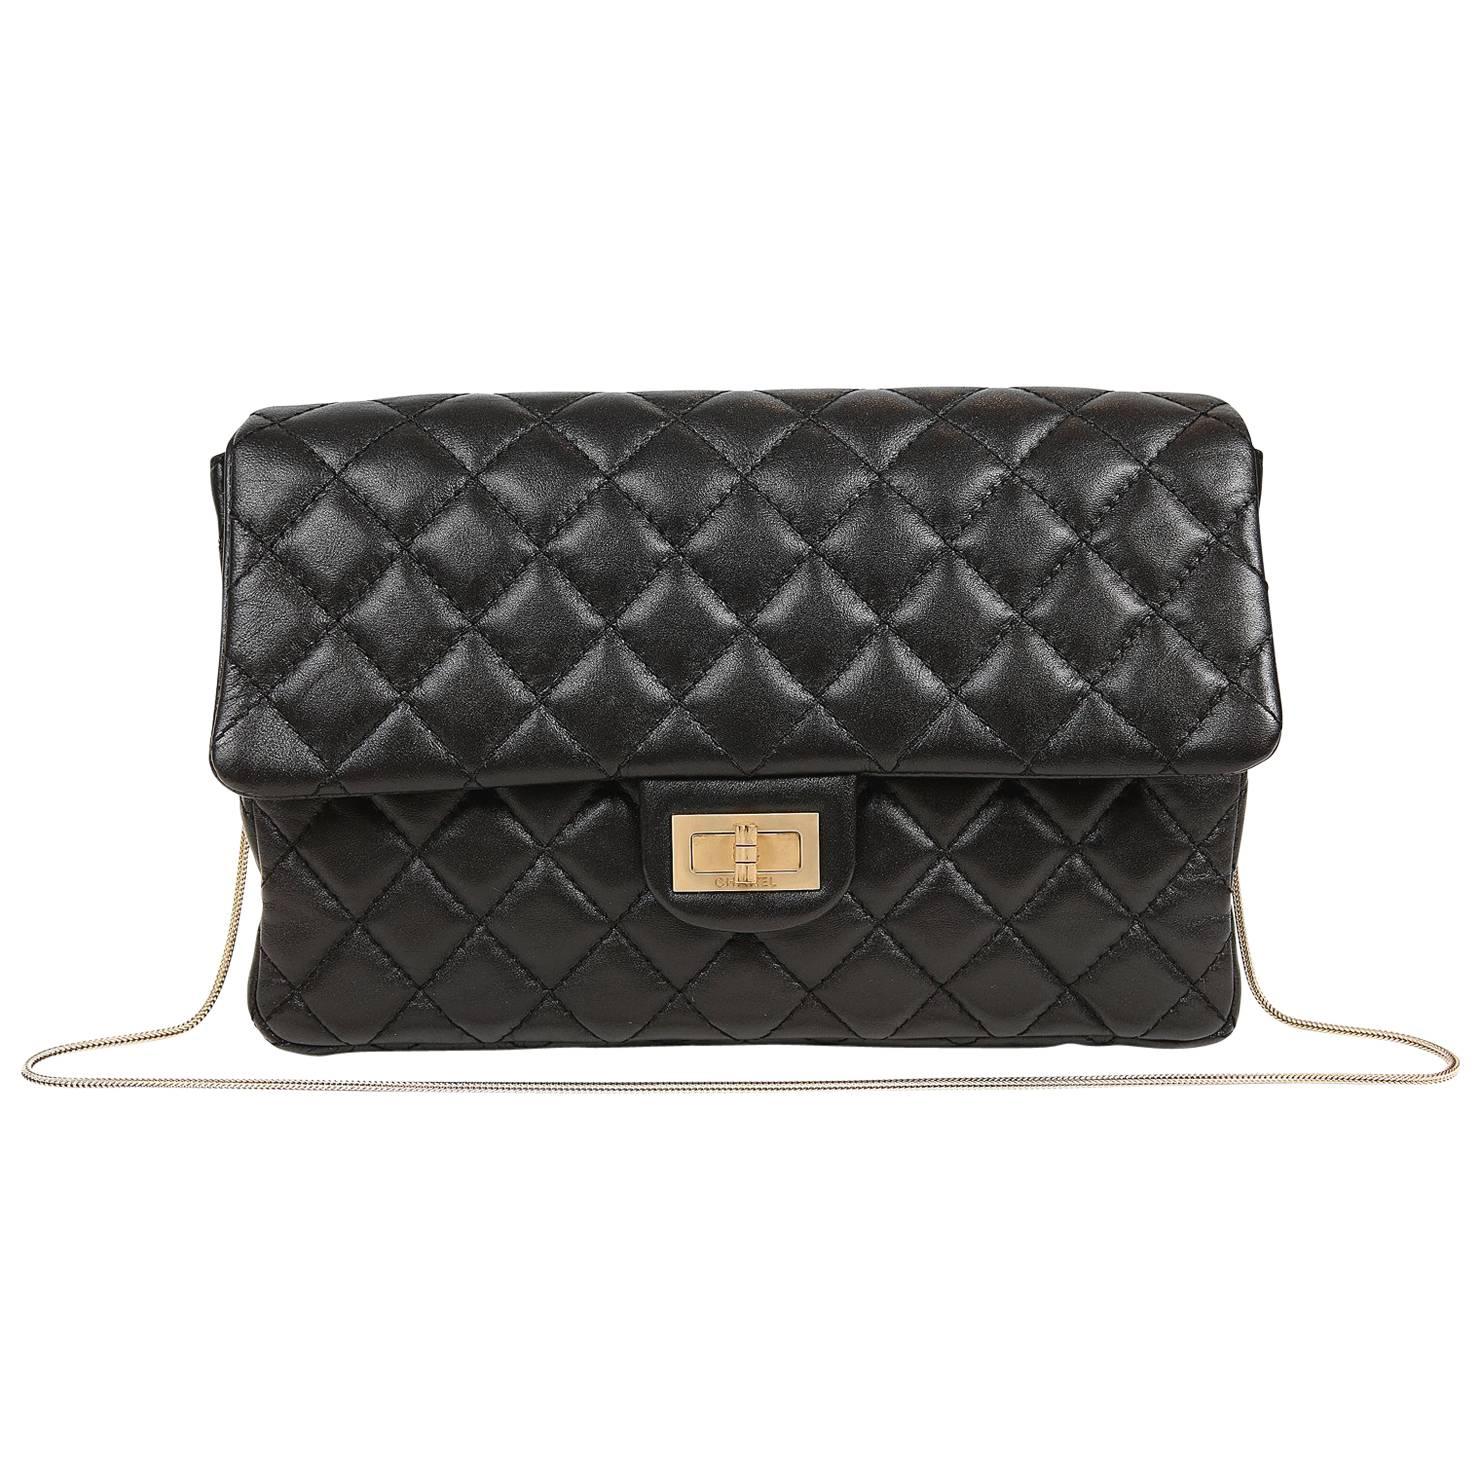 Chanel Black Quilted Leather Mademoiselle Flap Bag For Sale